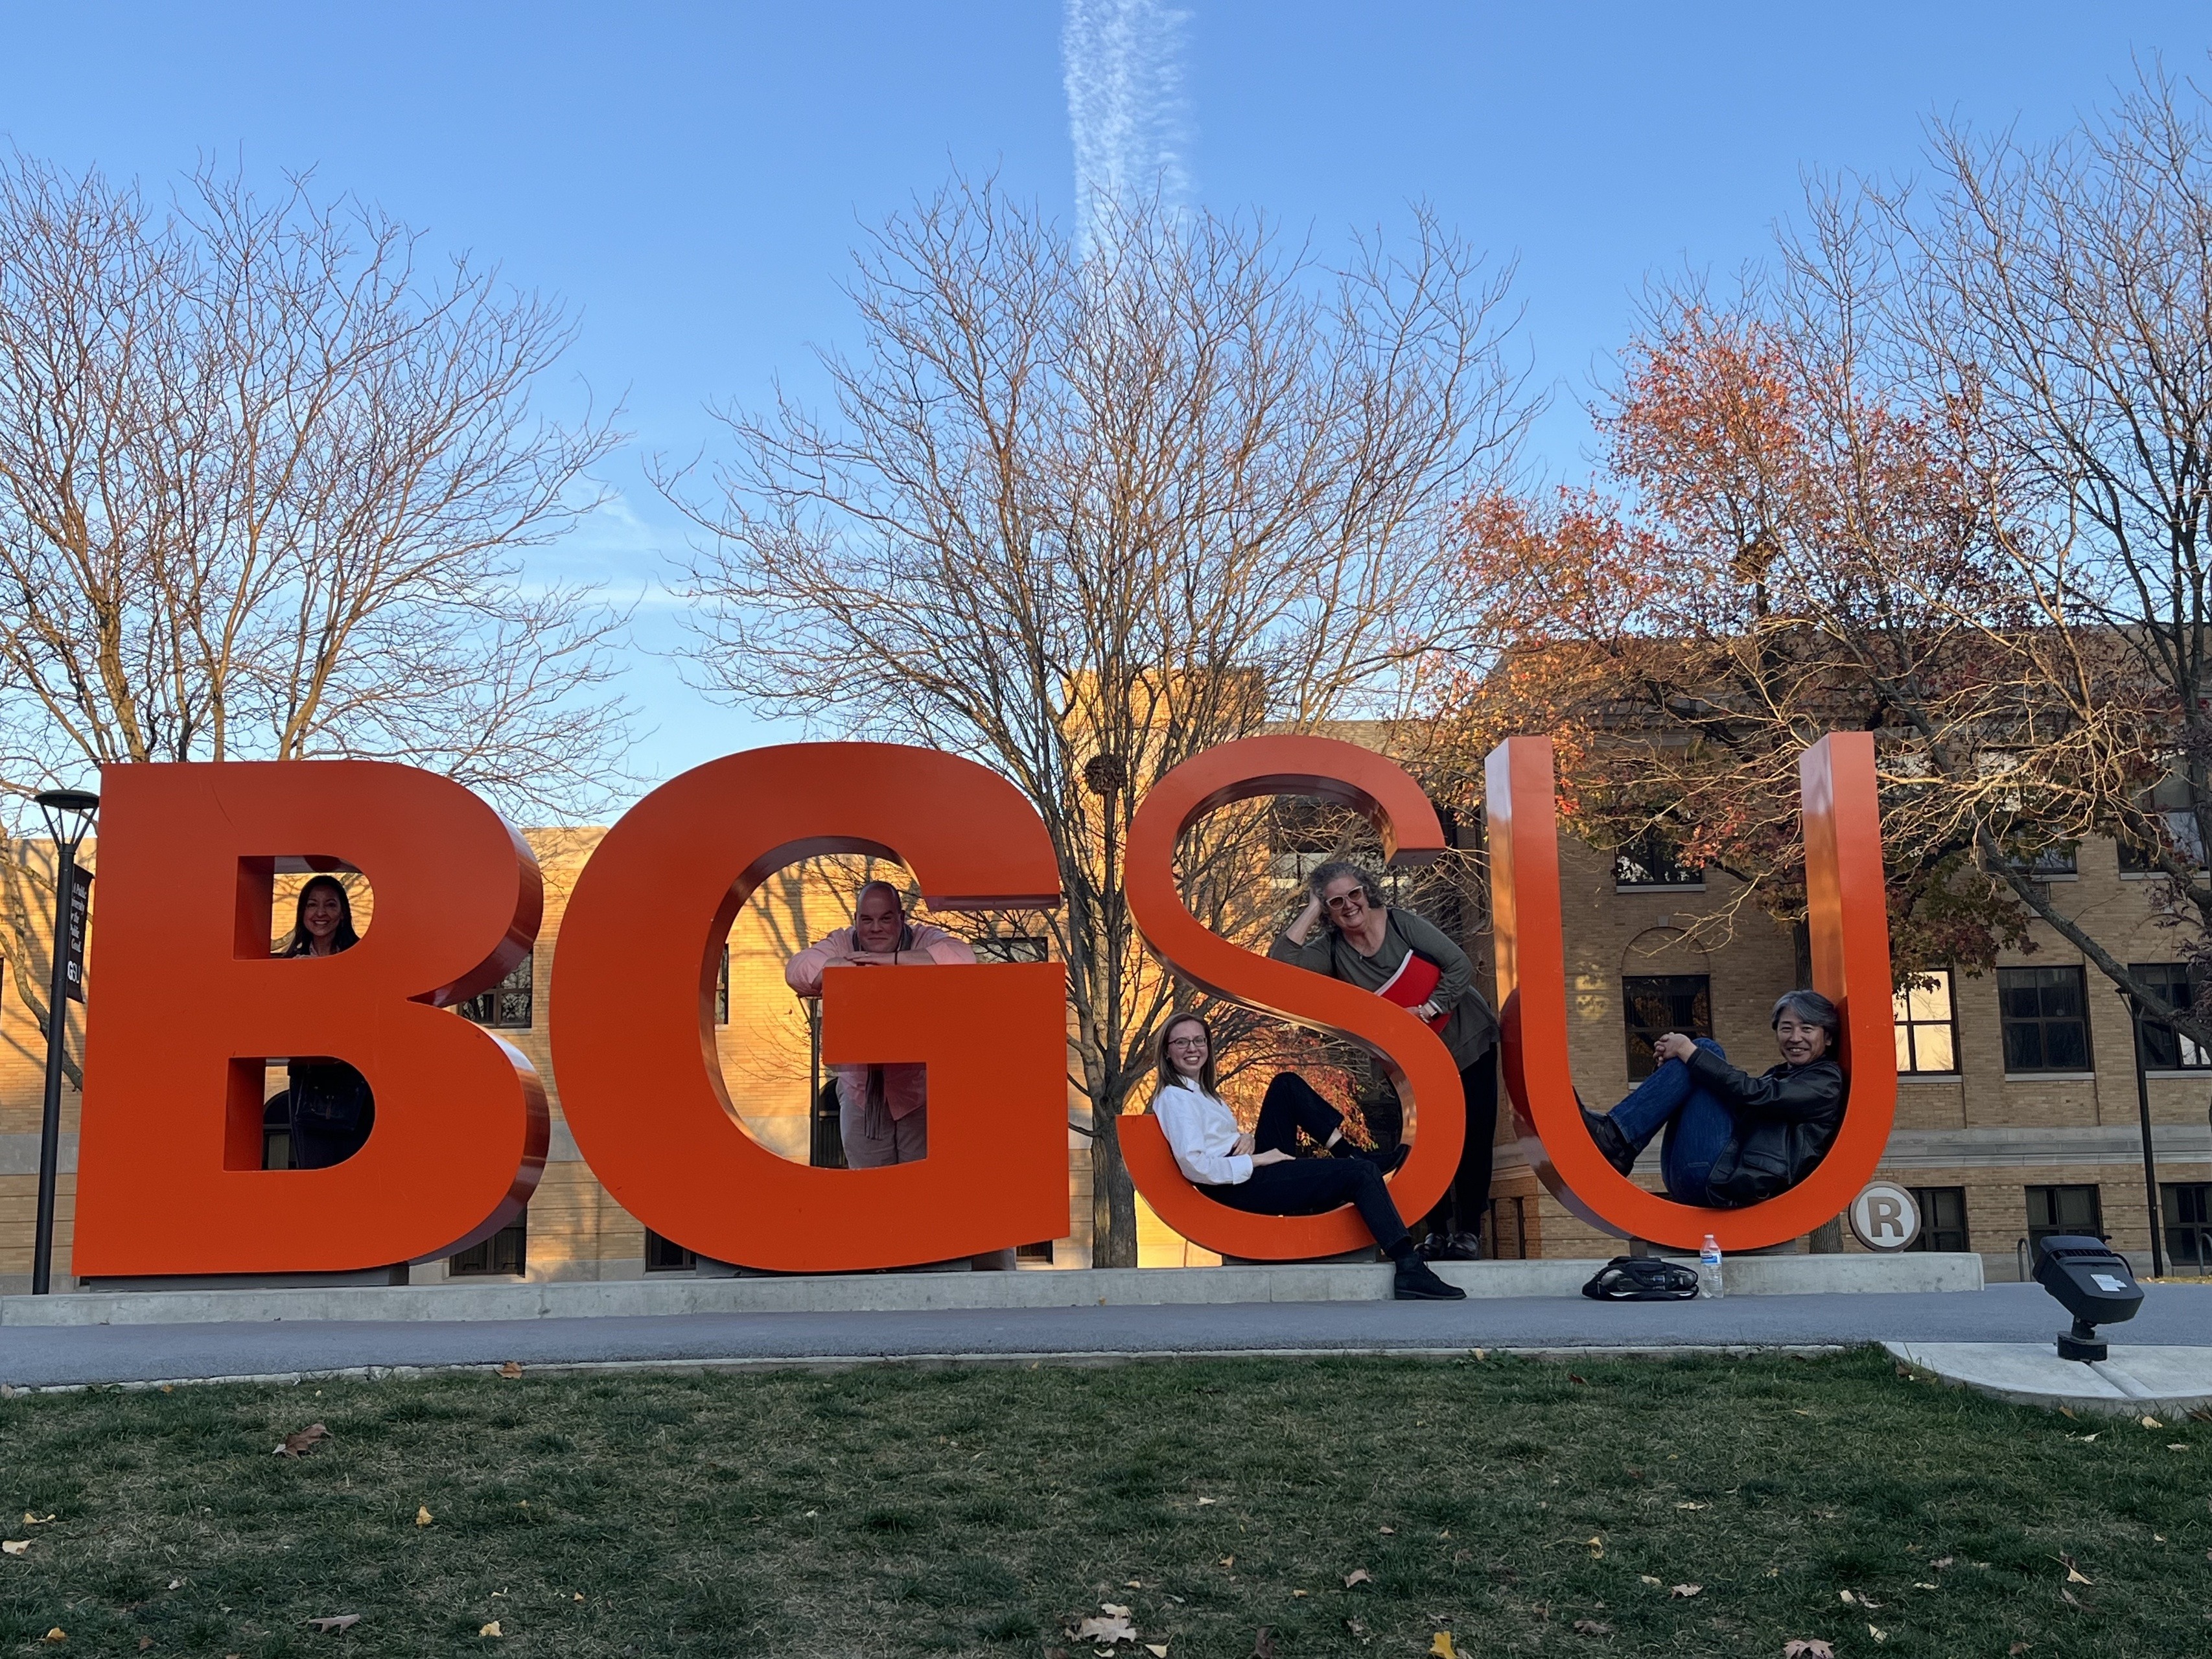 A photo of Paul Kei Matsuda and English Department faculty posing with the giant BGSU letters. Left to right: Fernanda Capraro faces camera through the top of letter B, Chad van Buskirk leans on letter G, Anastasiia Kryzhanivska and Lucinda Hunter are inside letter S, and Paul Kei Matsuda is sitting inside letter U. 